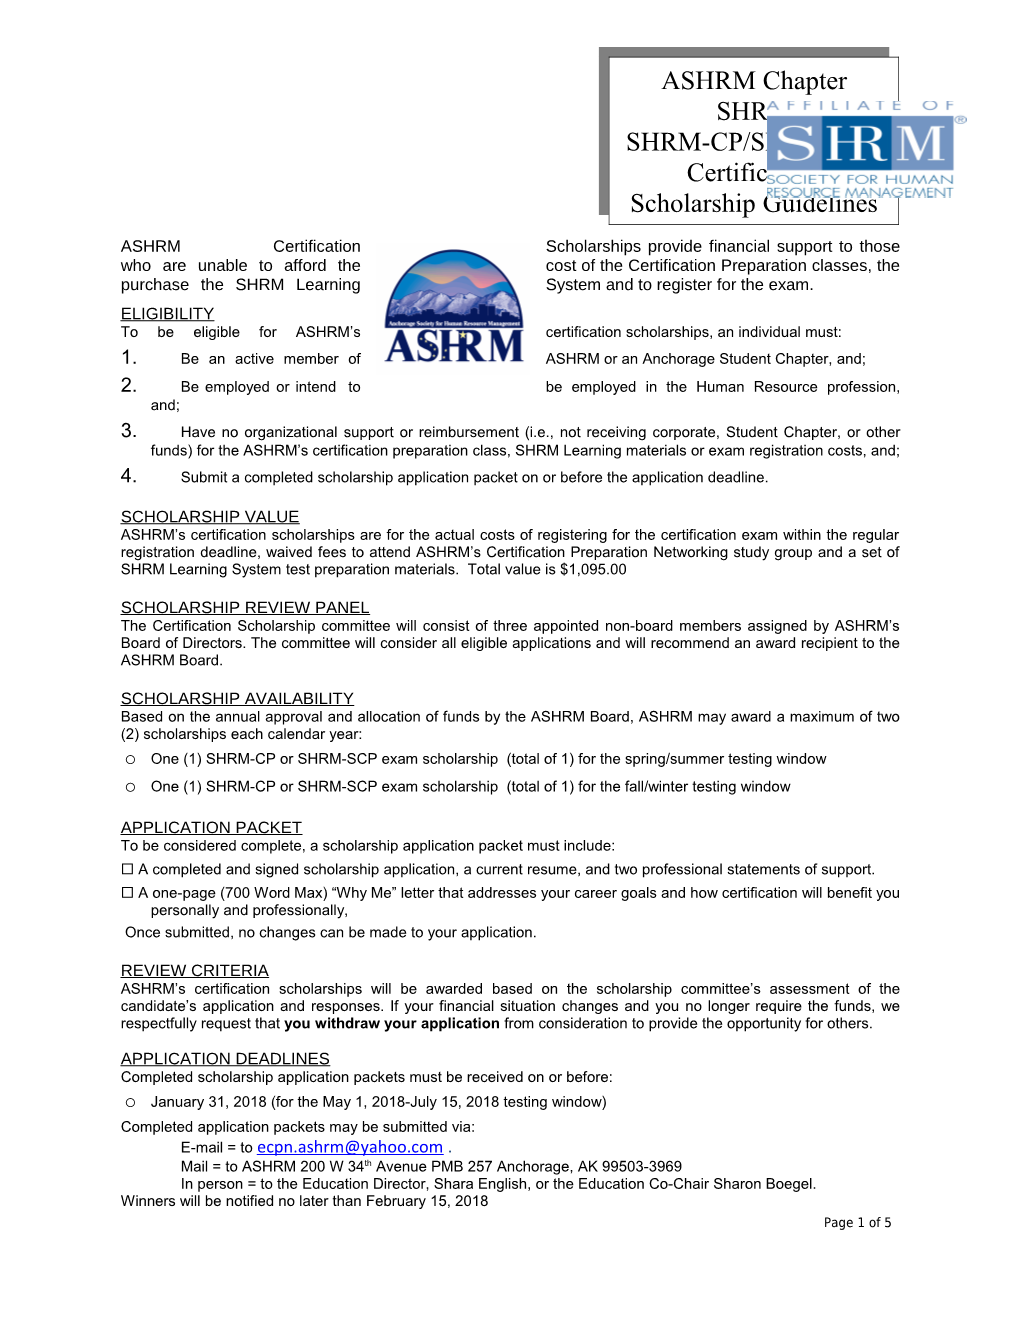 To Be Eligible for ASHRM S Certification Scholarships, an Individual Must